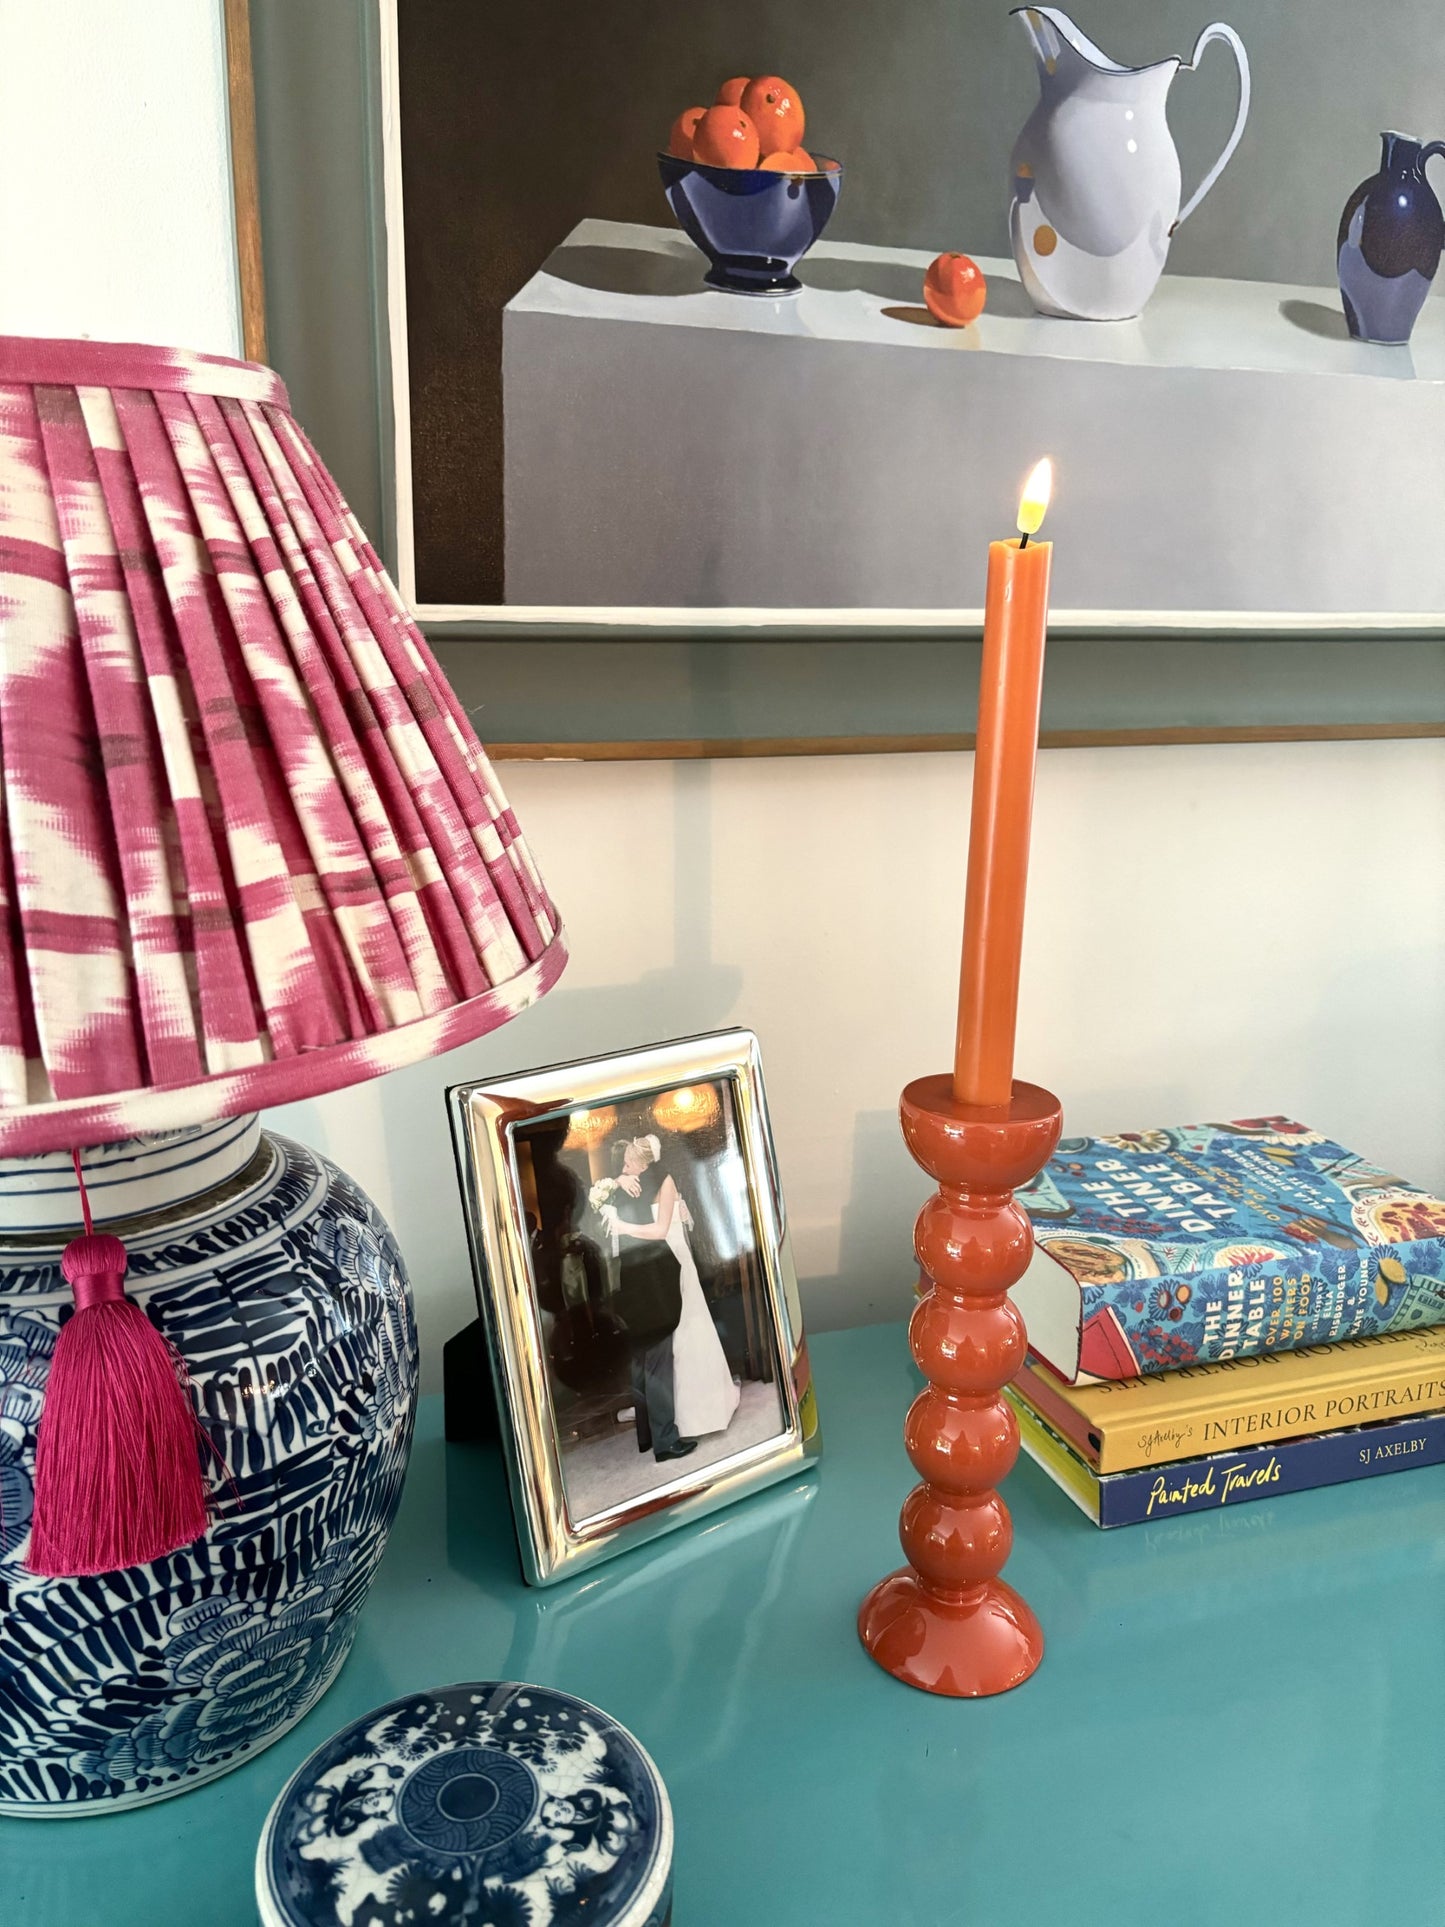 An orange bobbin candlestick on a sideboard with a ginger jar lamp, photo and books.  There is a still life painting of a bowl of oranges in the background.